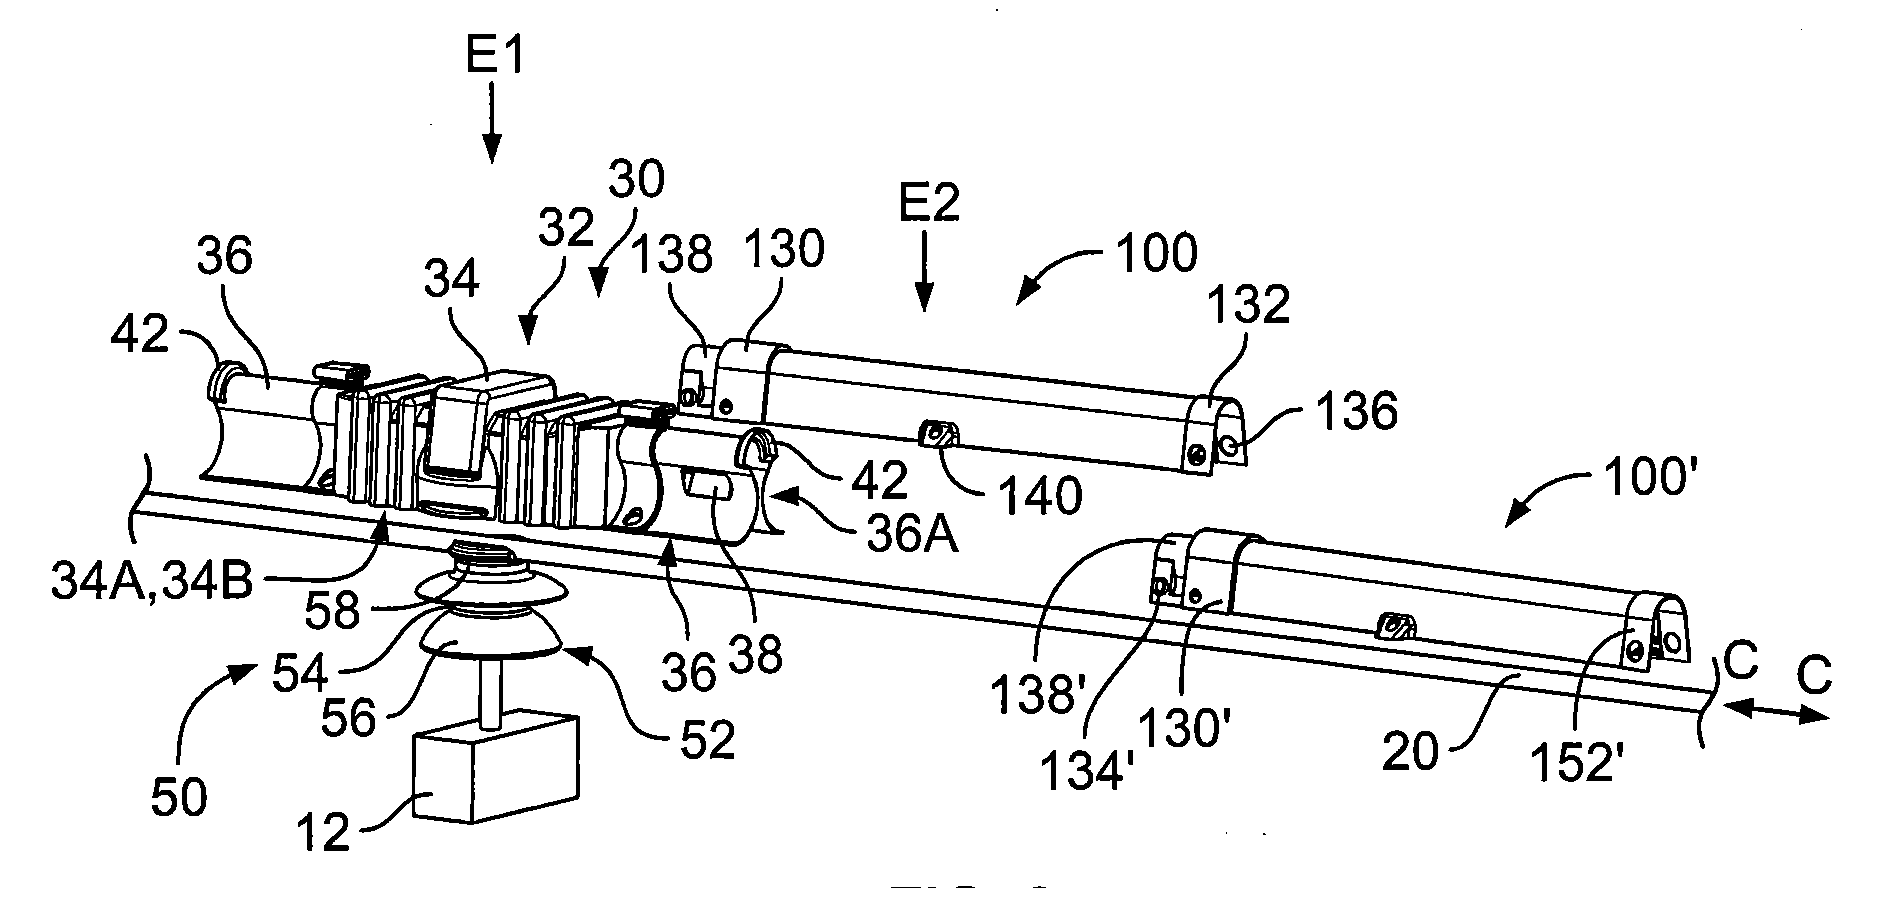 Covers for electrical distribution lines and insulators and methods and systems including same